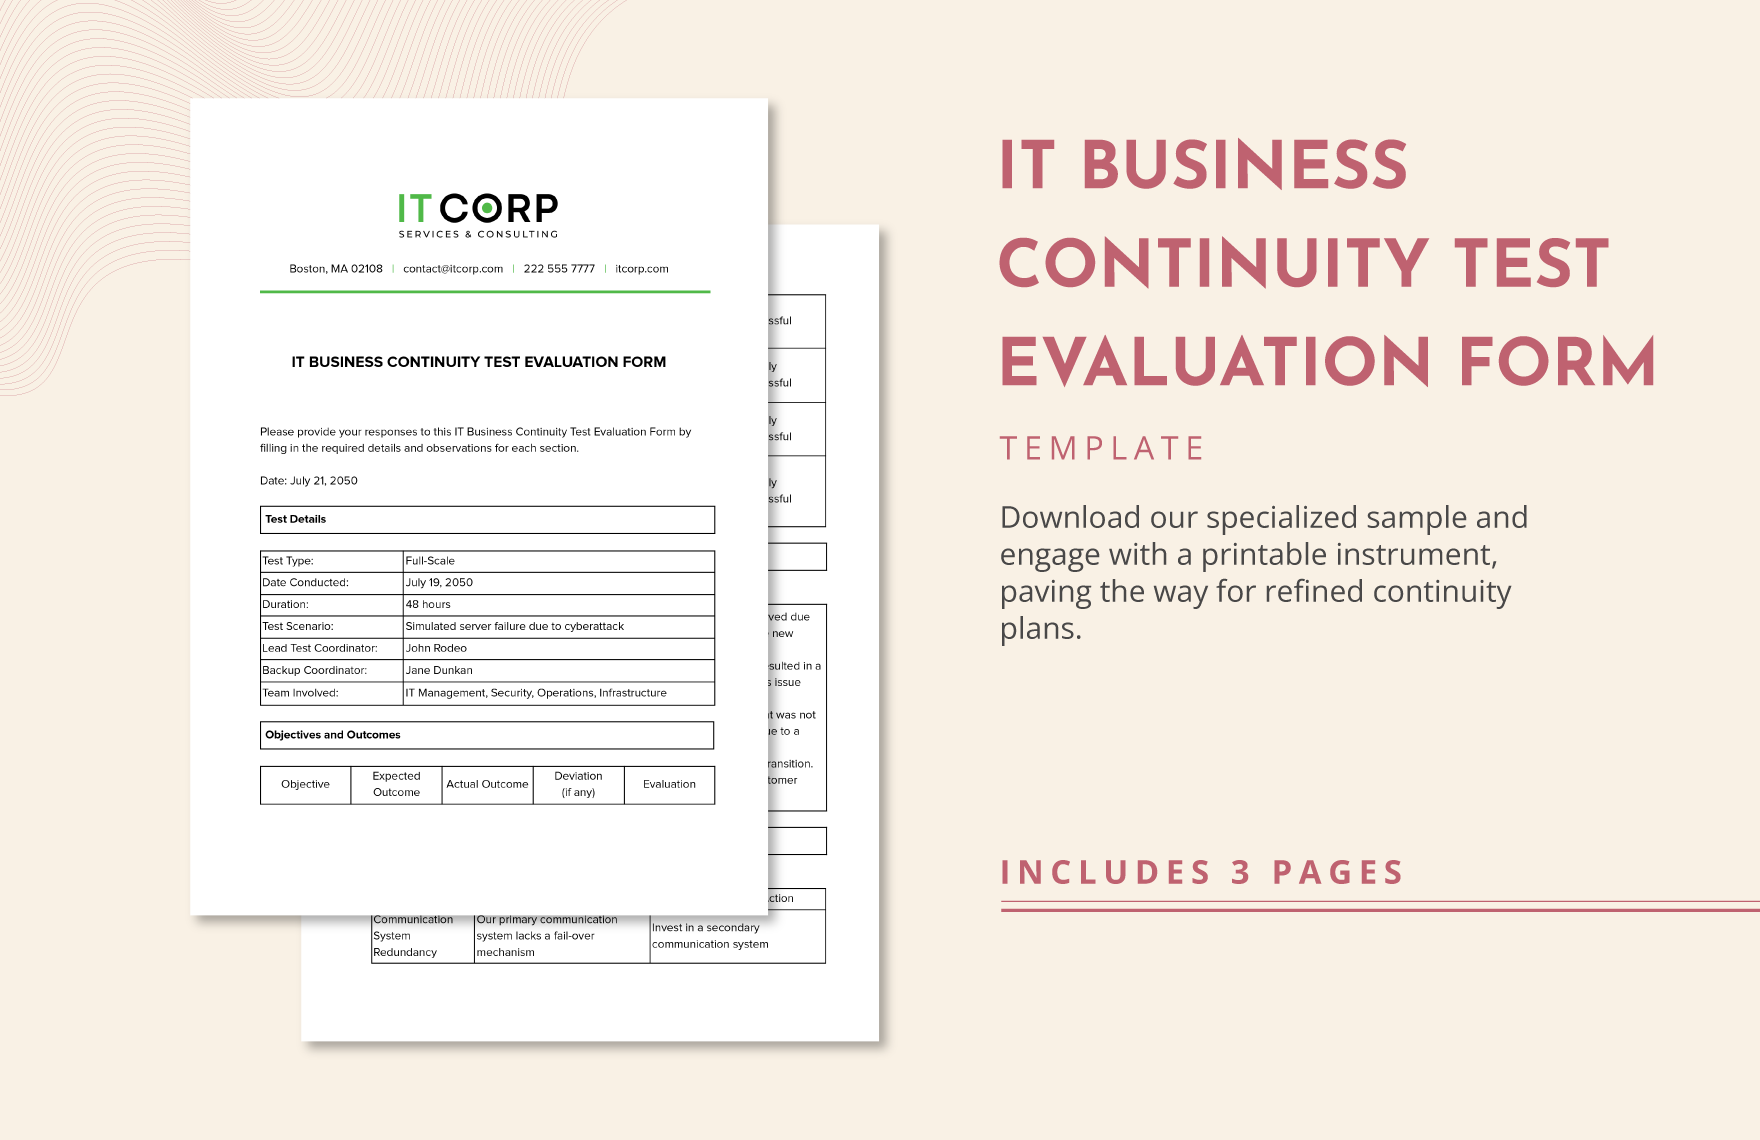 IT Business Continuity Test Evaluation Form Template